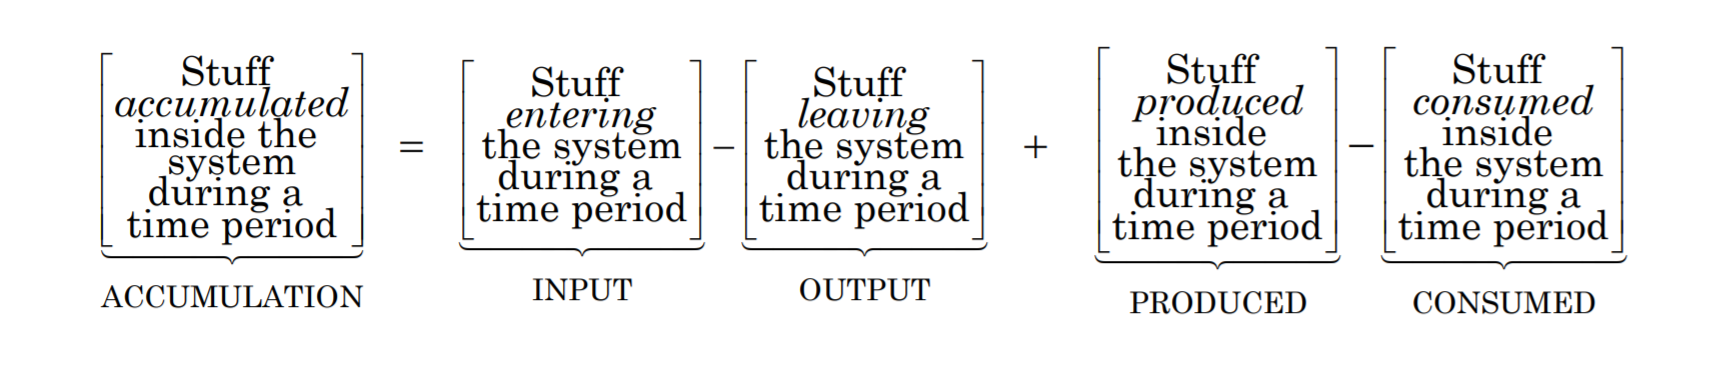 Accumulation, or stuff accumulated inside a system in a time period, is the system's input during that period minus the system's output, plus the stuff produced inside the system minus the stuff consumed inside the system.